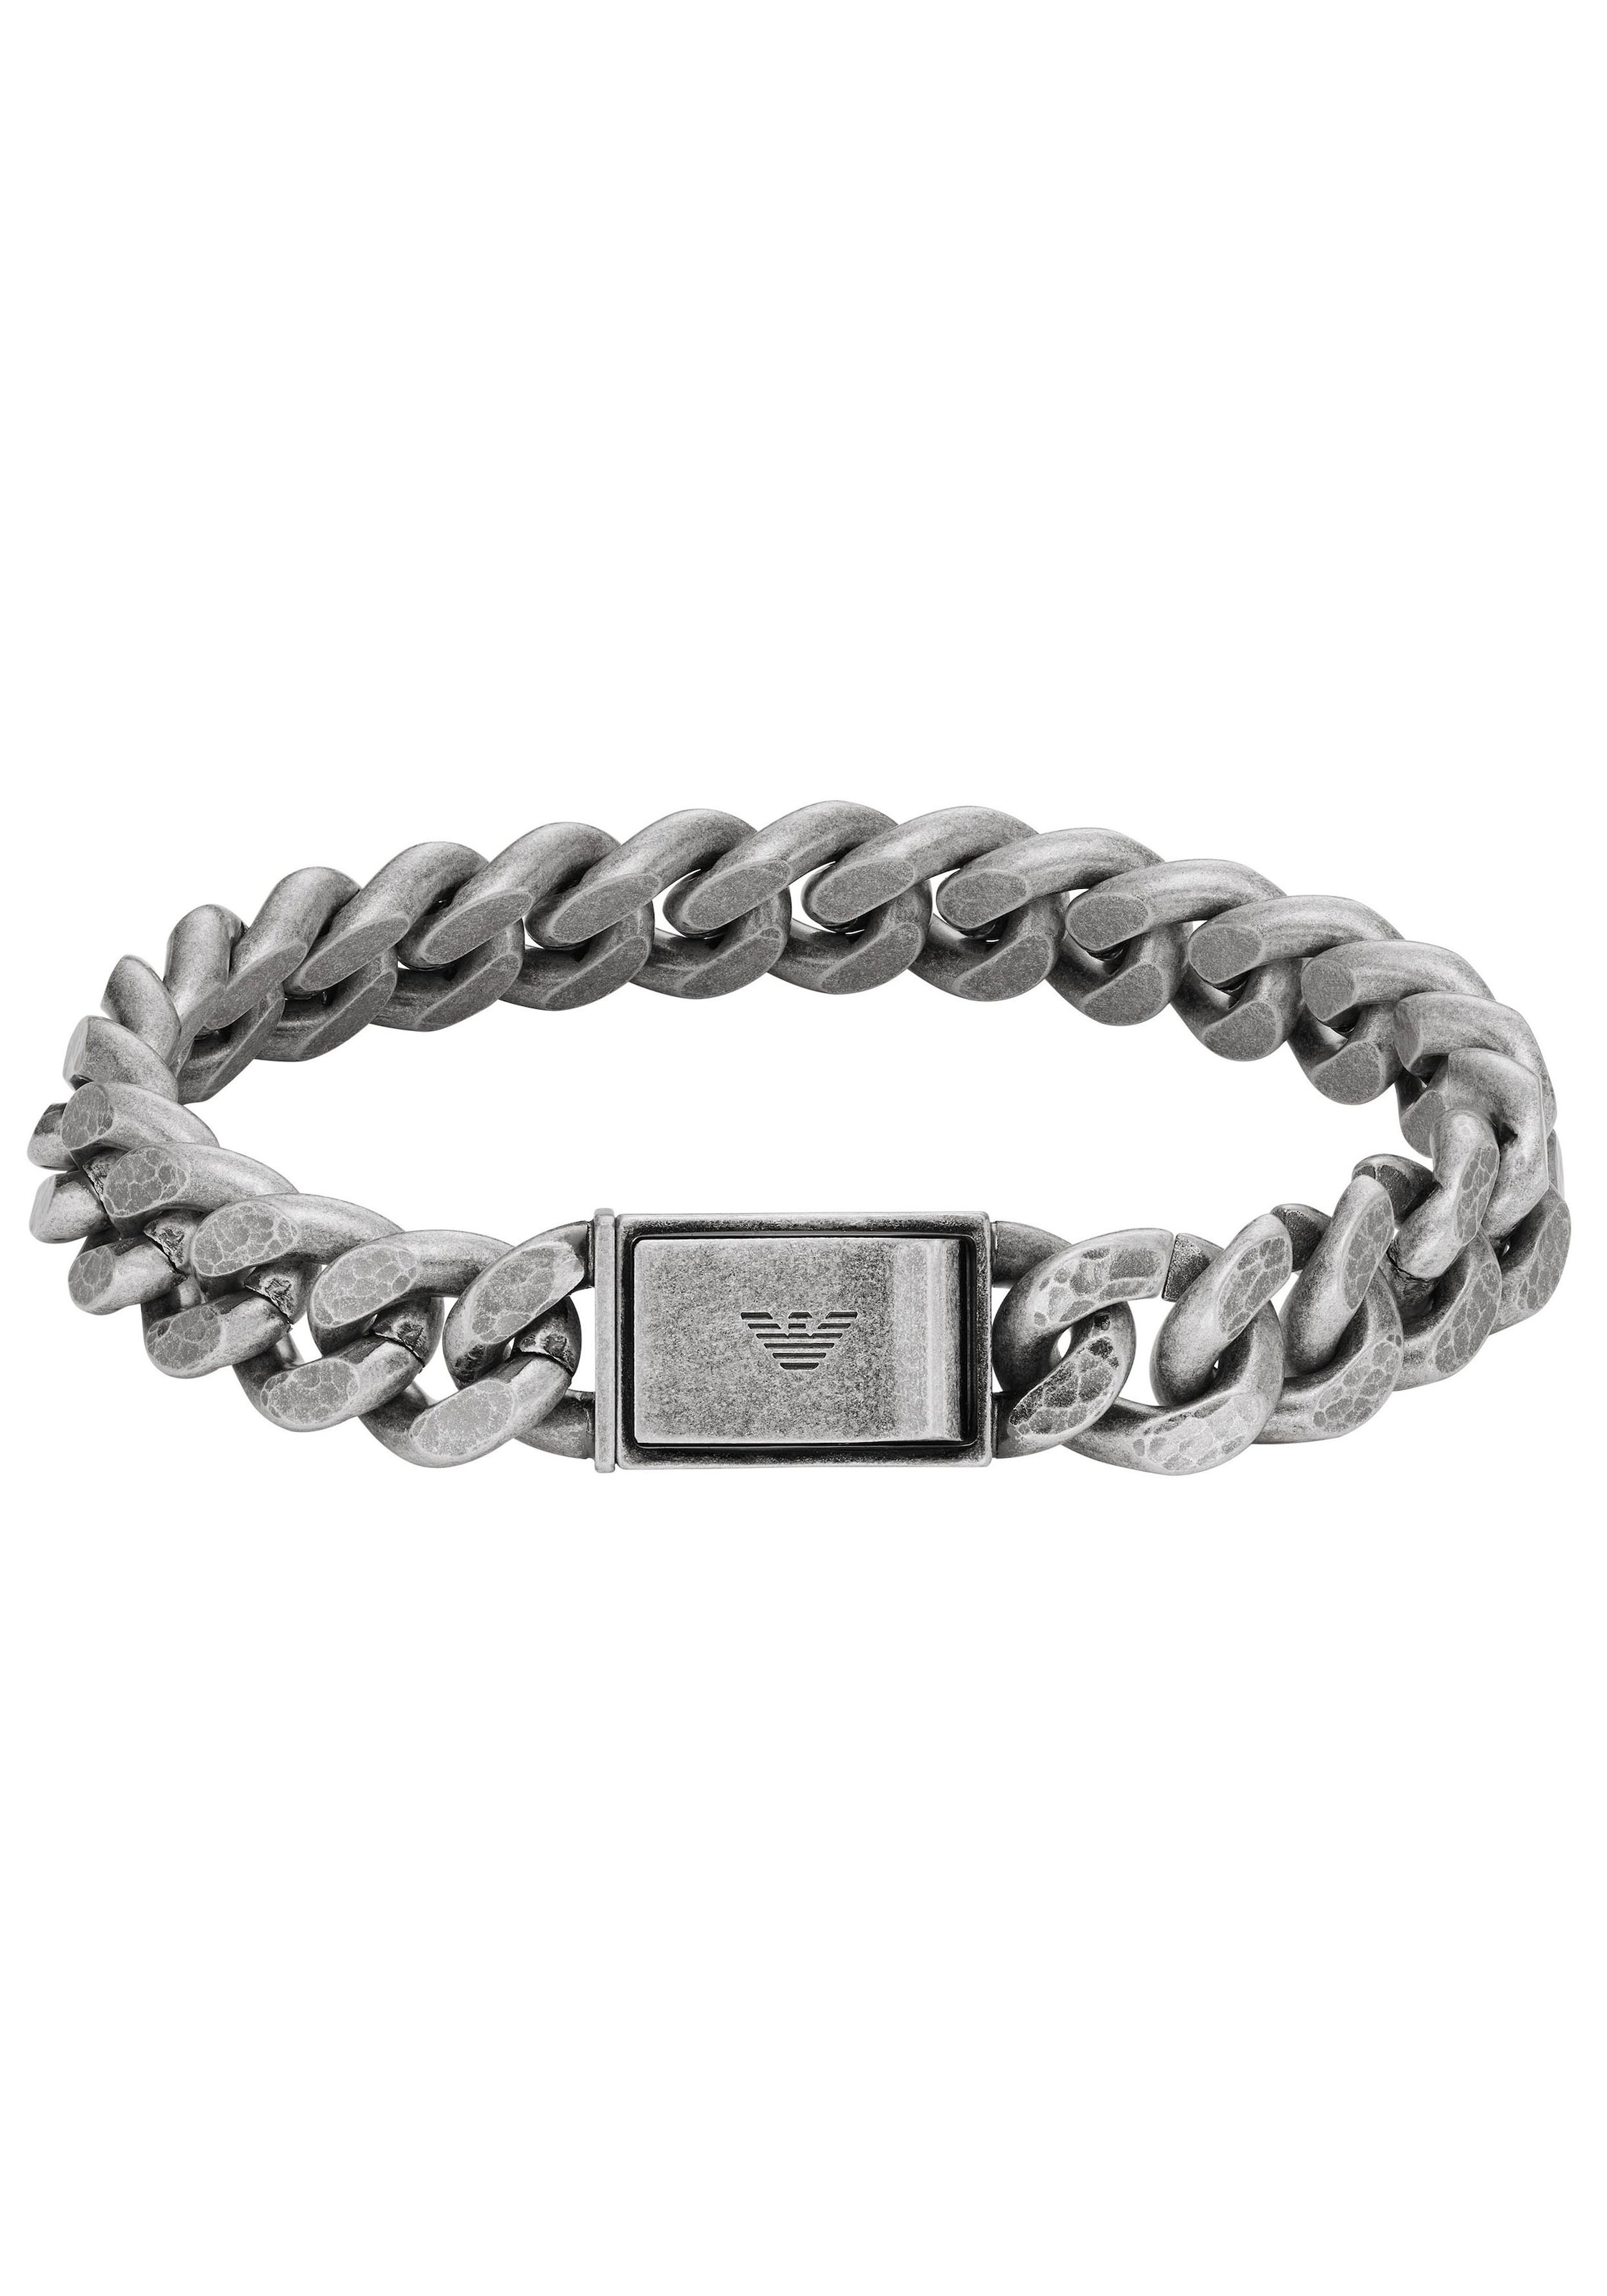 CHAINED, BAUR »ICONIC Armani EGS3036040«, Edelstahl Armband TREND, | Emporio